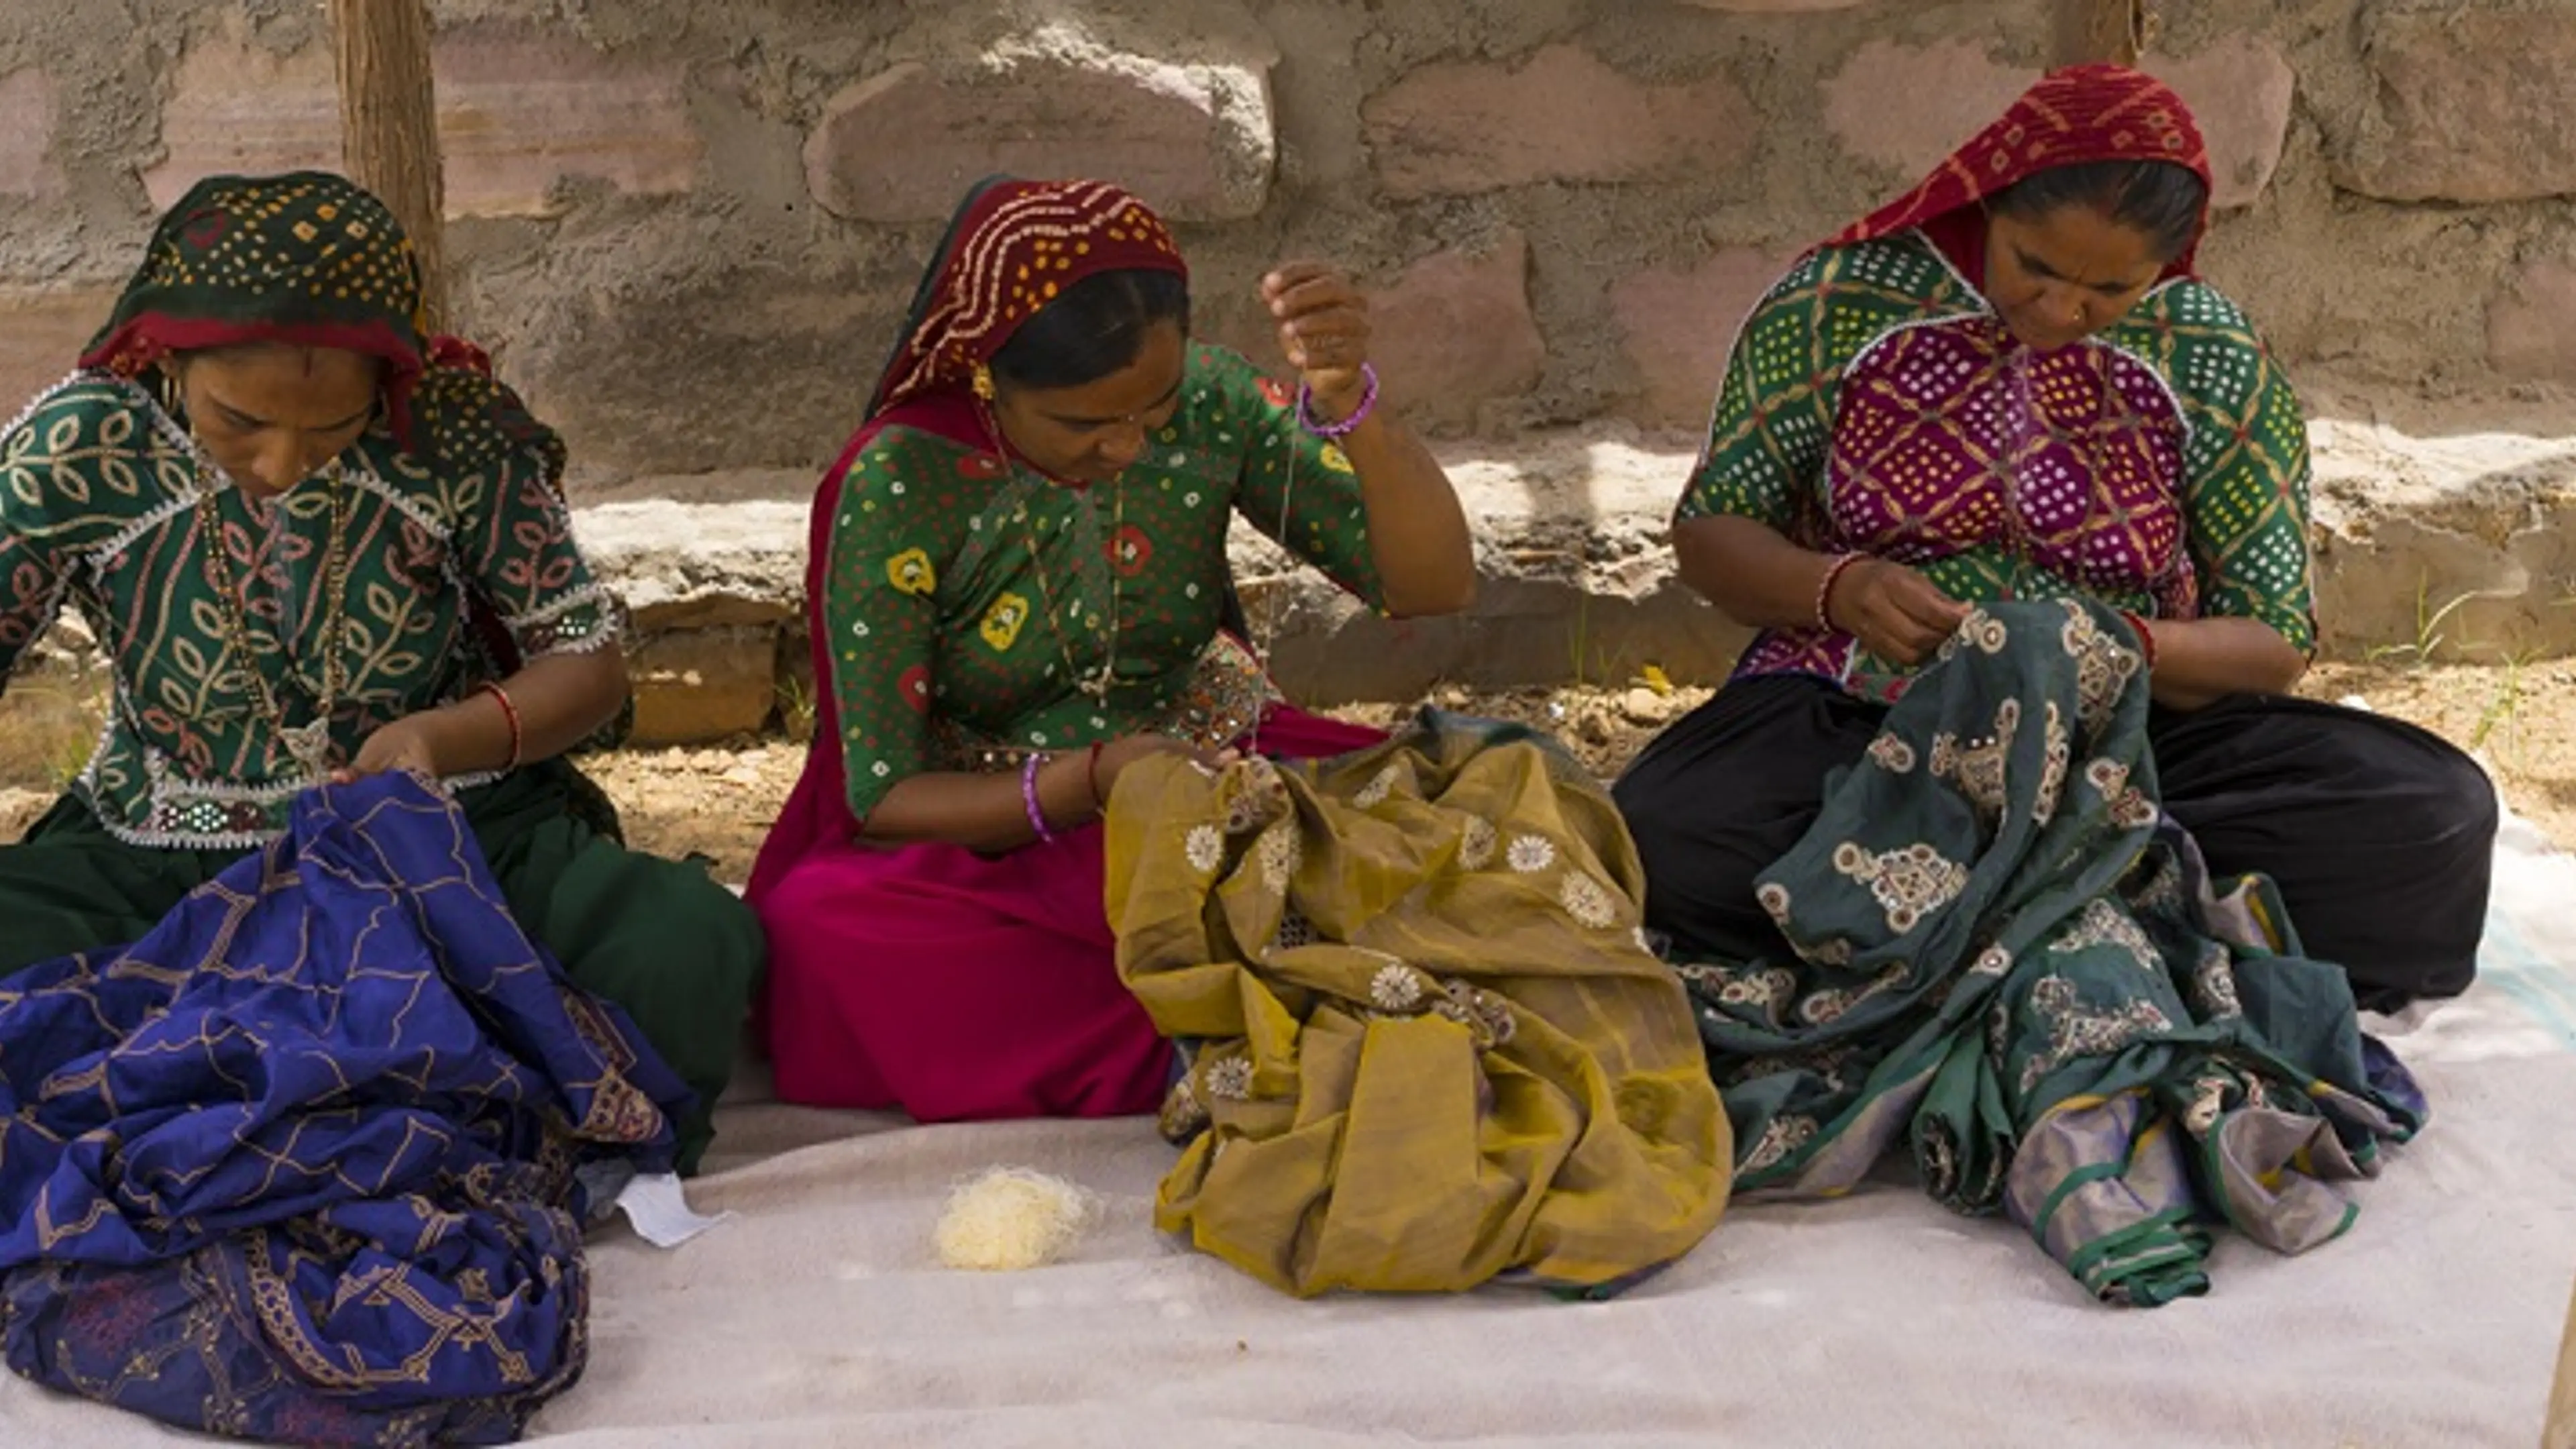 How Chandaben Shroff’s mission, started in 1969, is today empowering 4,000 women artisans in Kutch